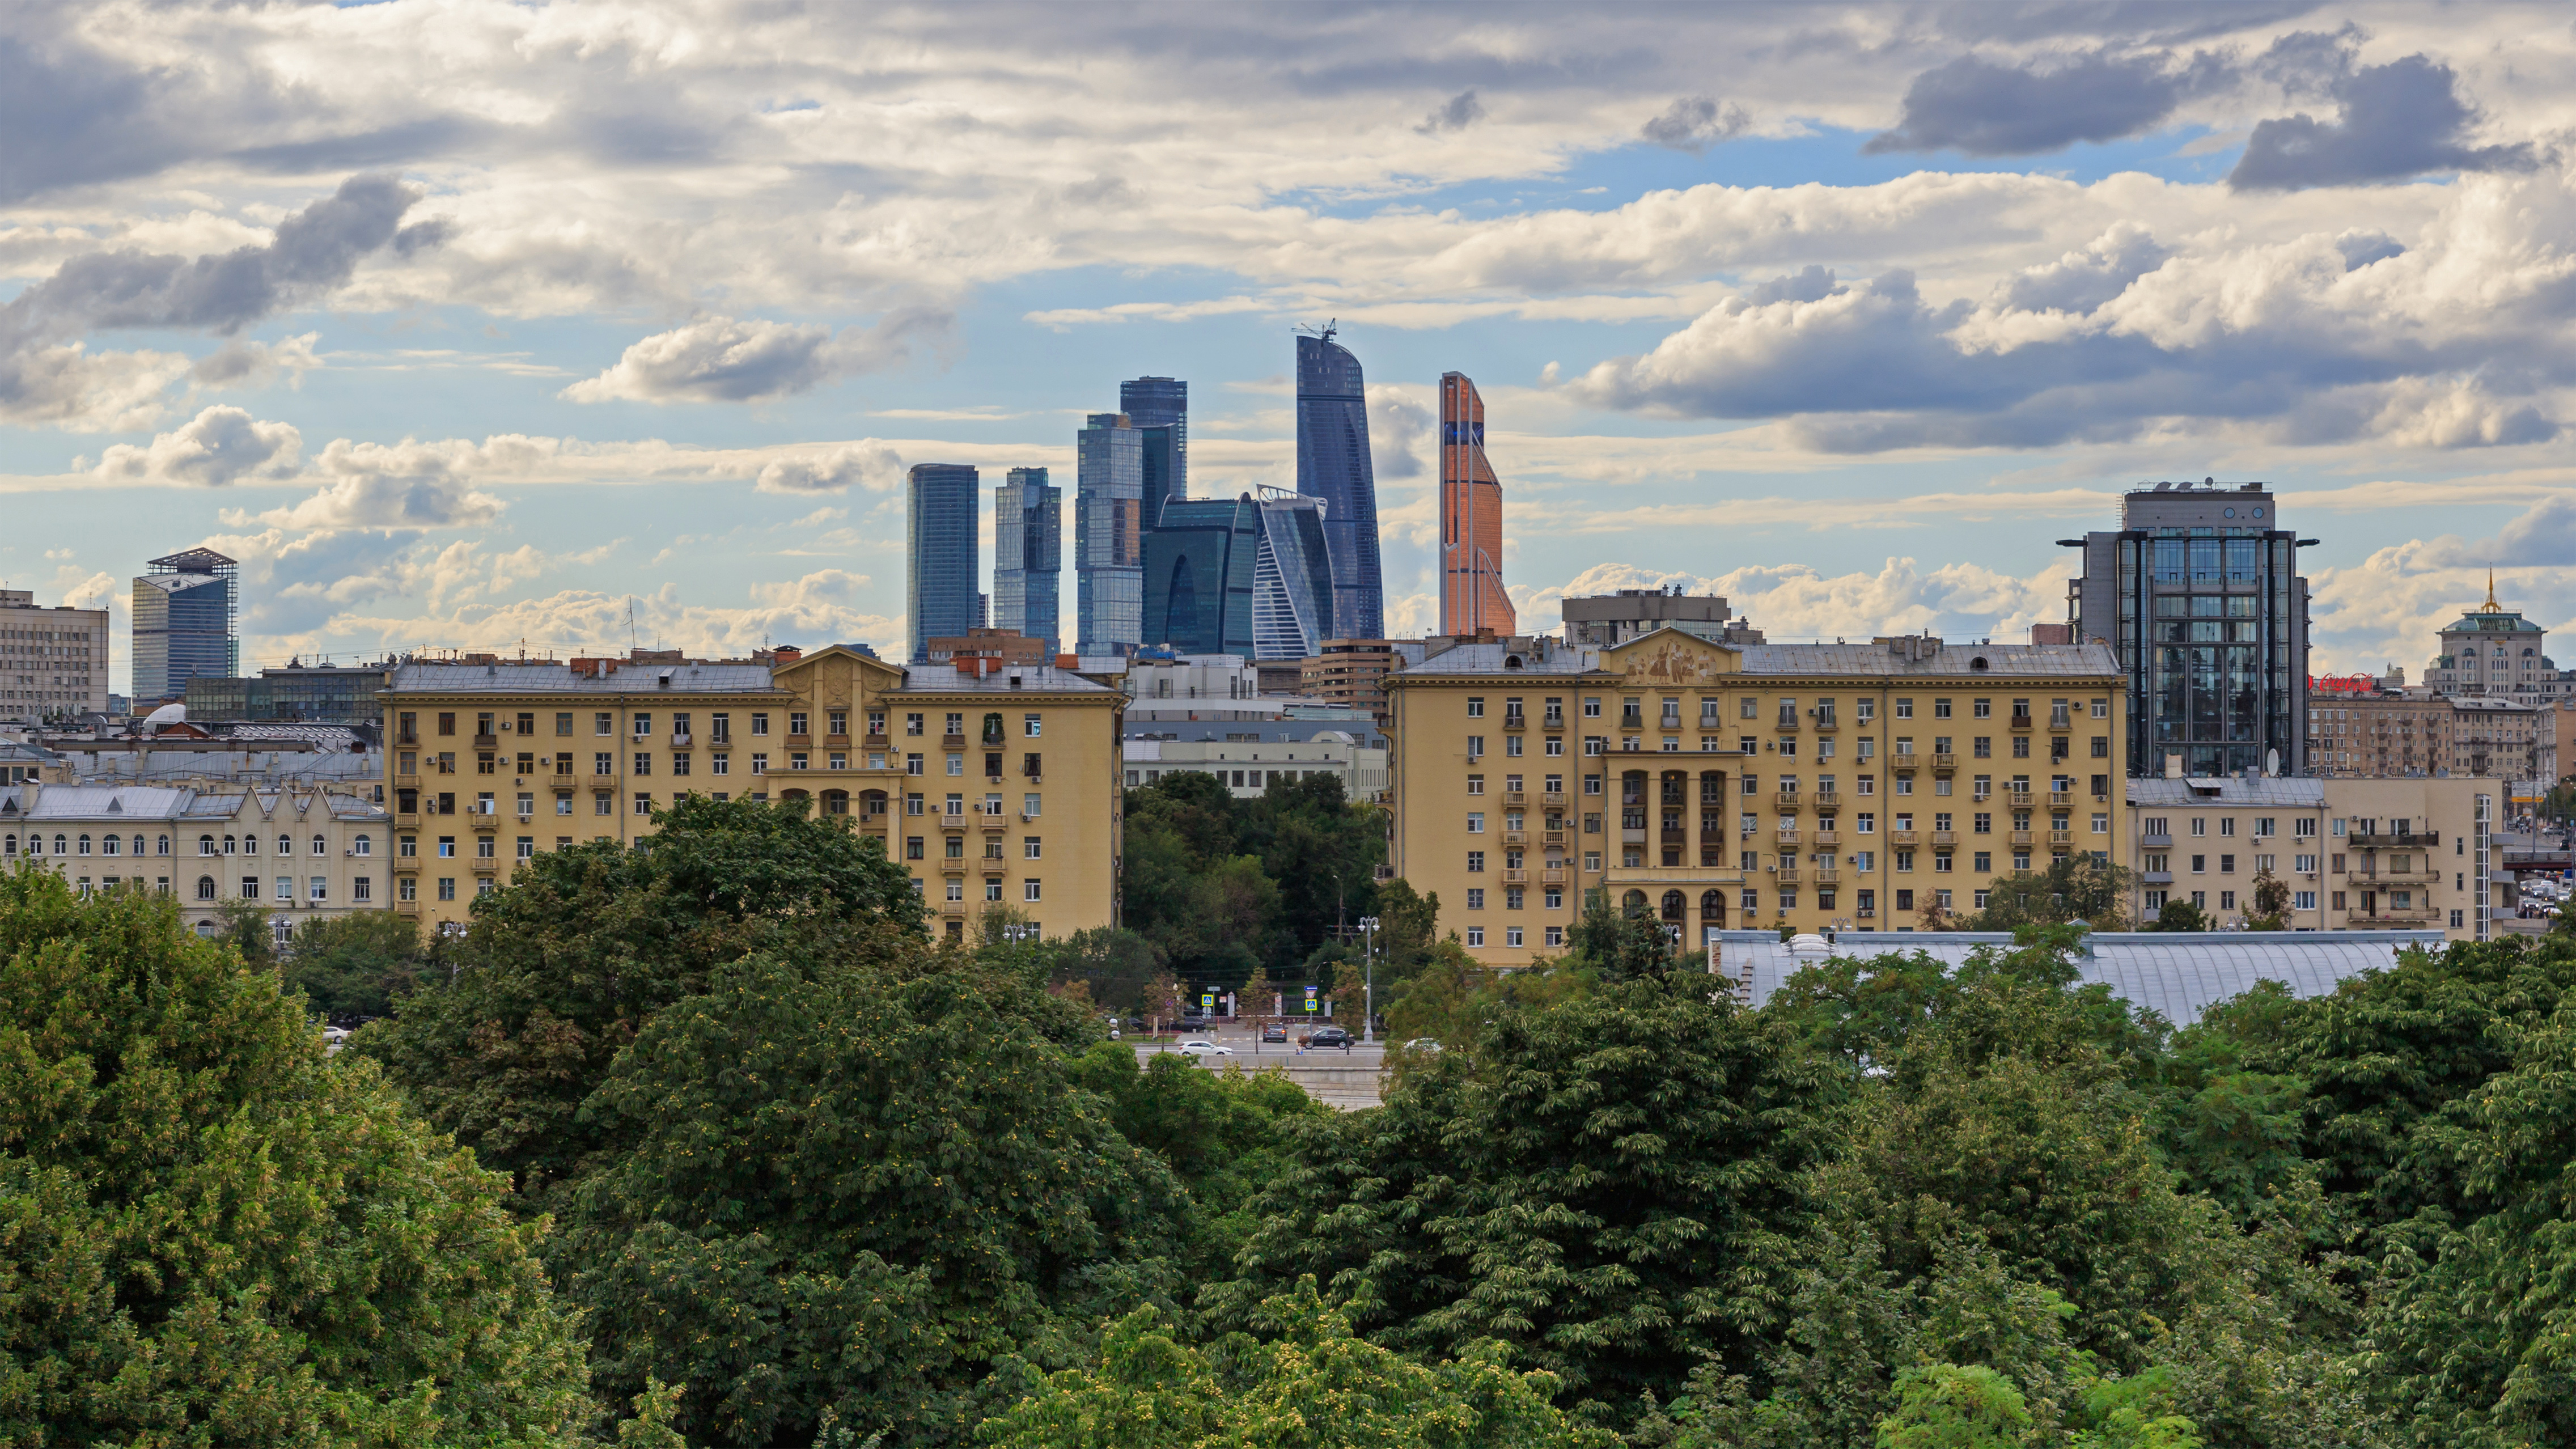 Moscow Gorky Park colonnades viewpoint 08-2016 img3